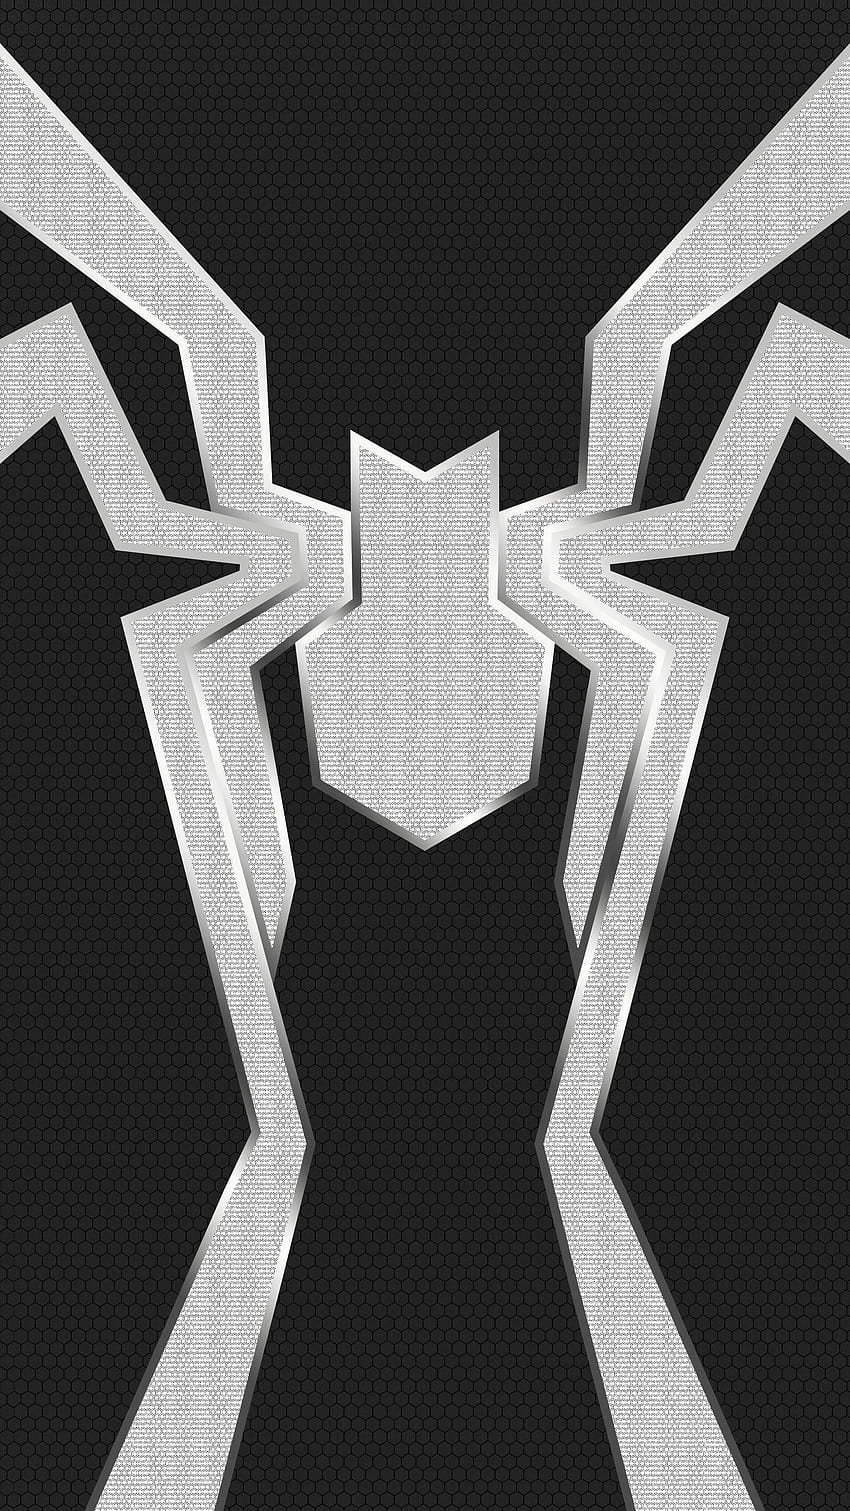 Created Spider Man Based Off The New Iron Spider Suit, Spiderman Black Suit Logo HD phone wallpaper